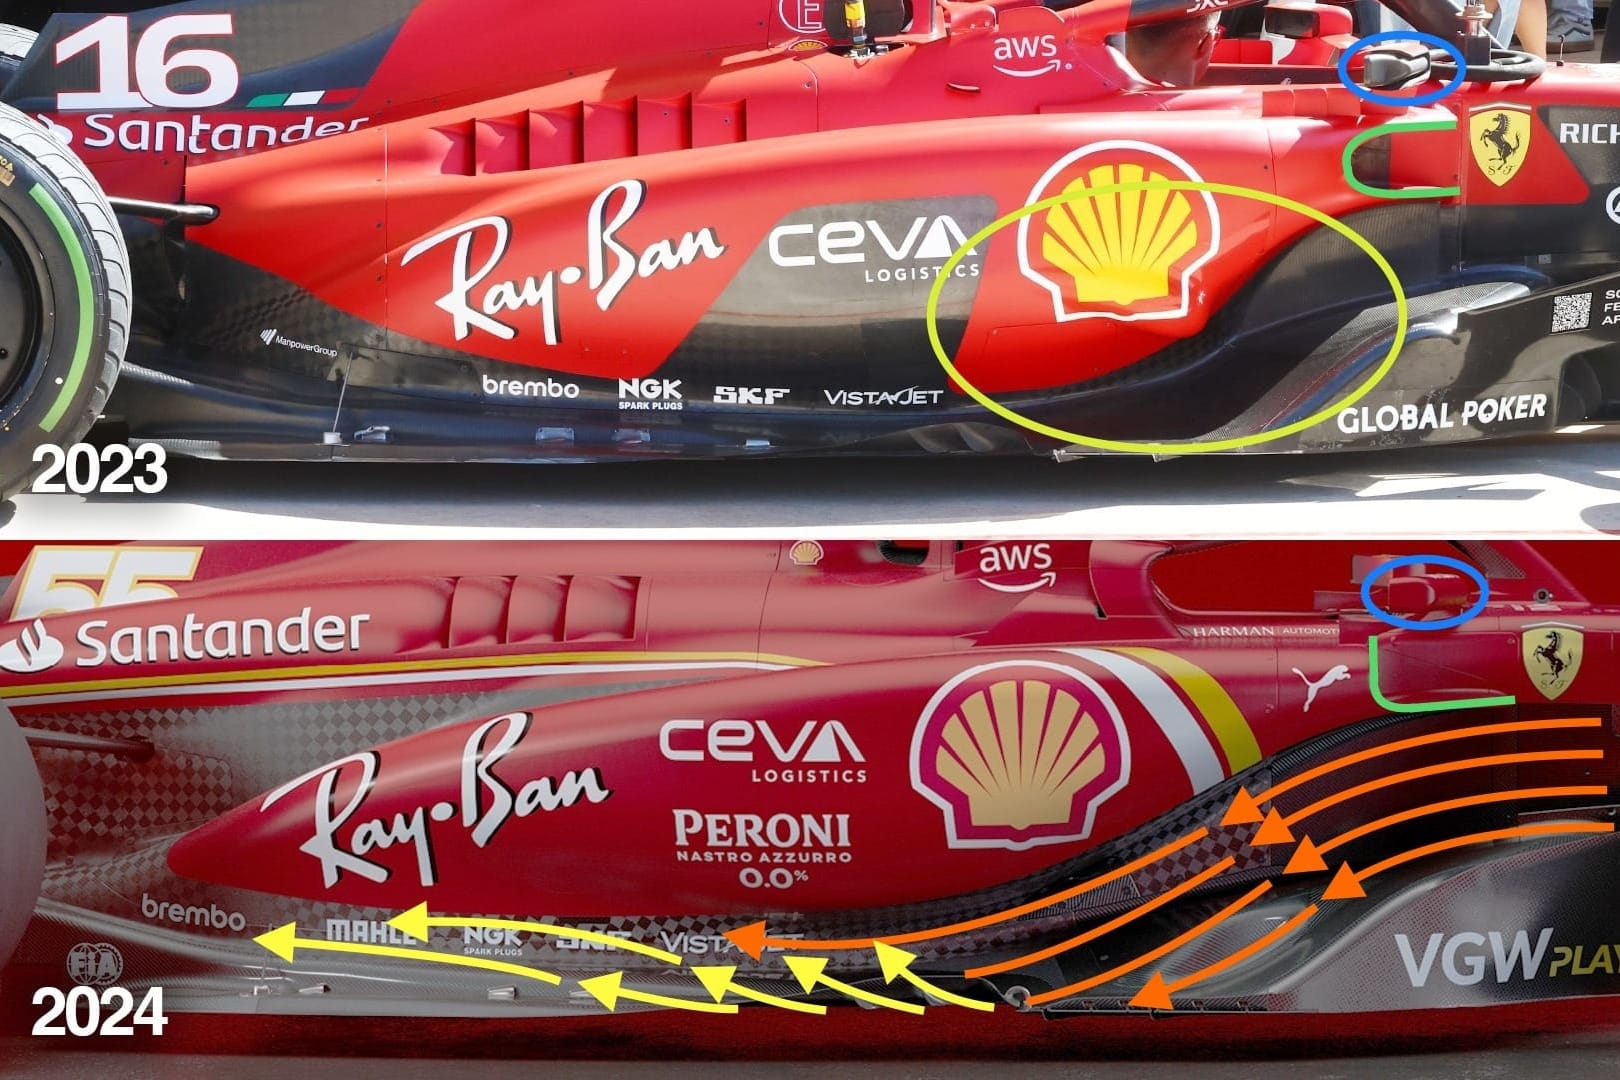 2023 Ferrari F1 innovation which their rivals will struggle to copy